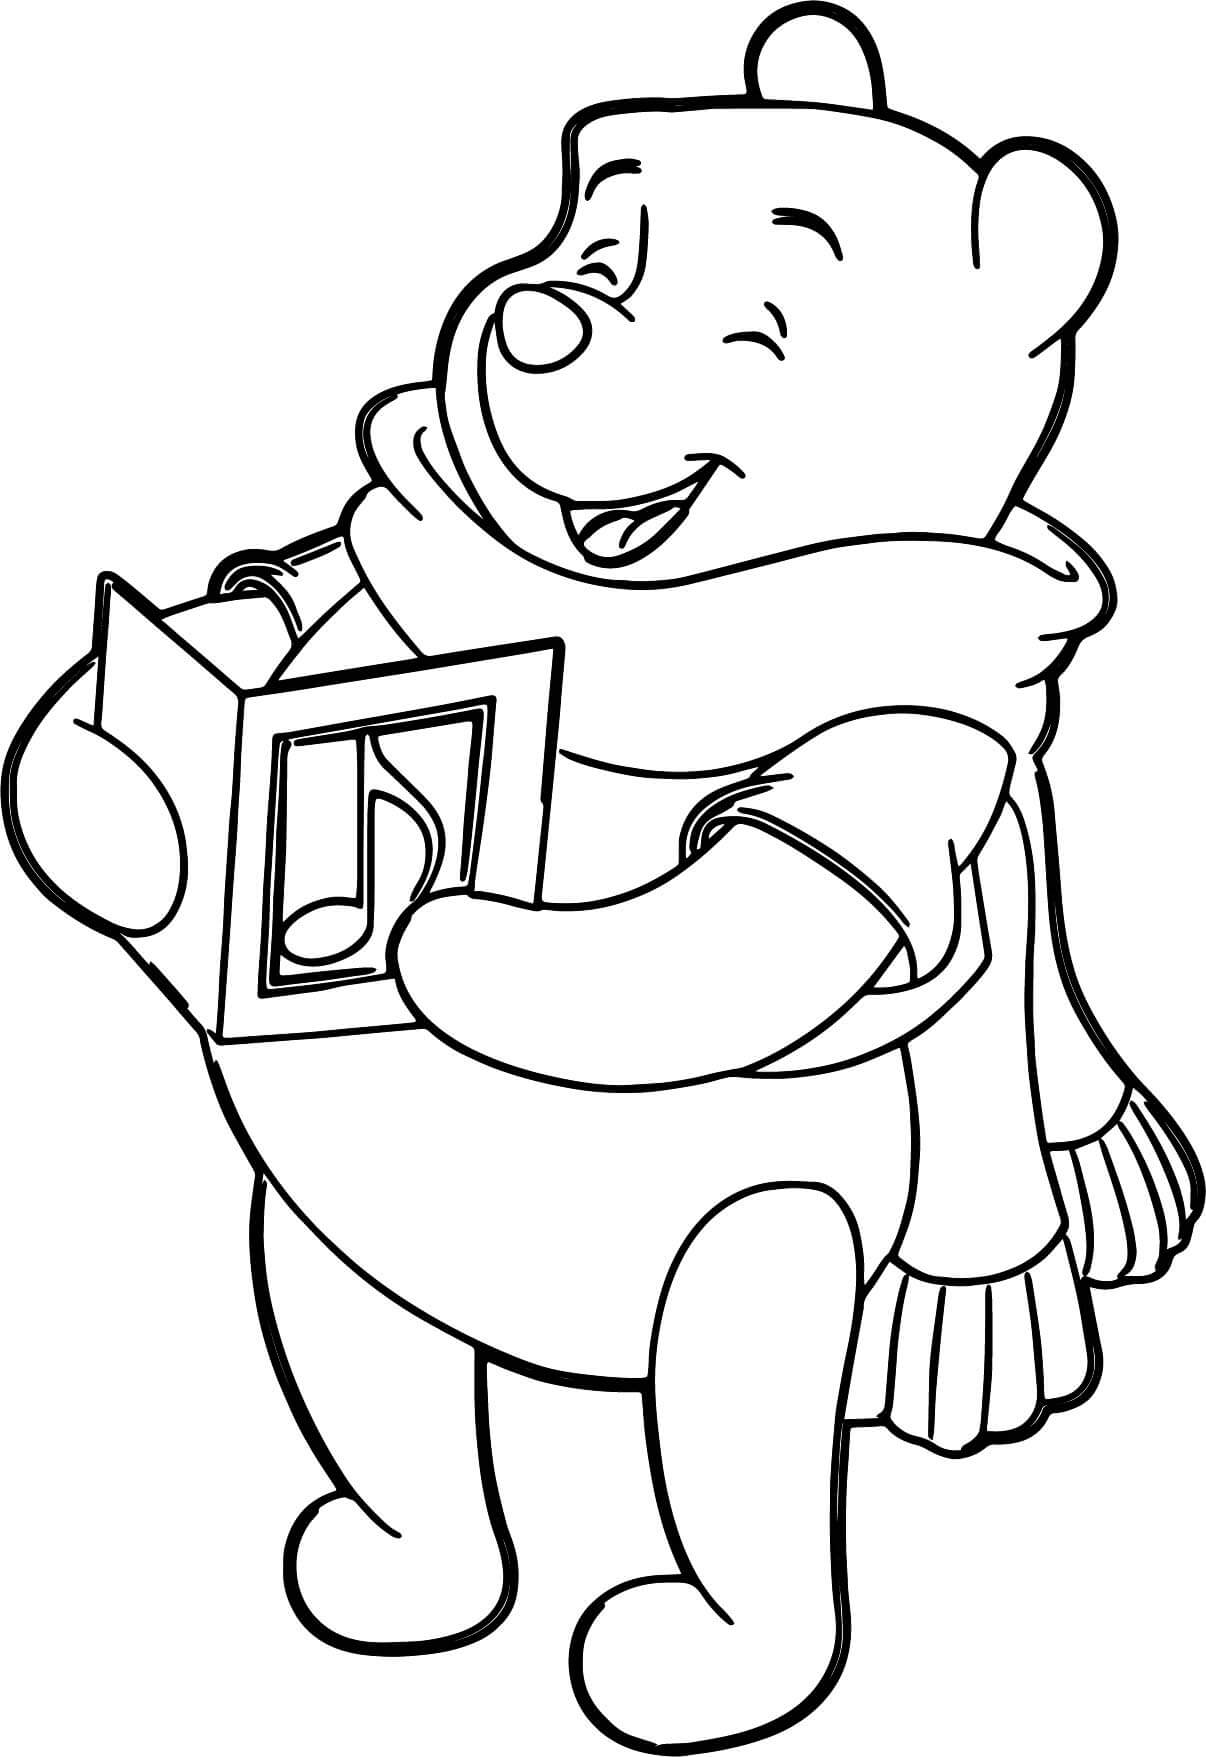 Christmas Caroling Winnie the Pooh Coloring Pages